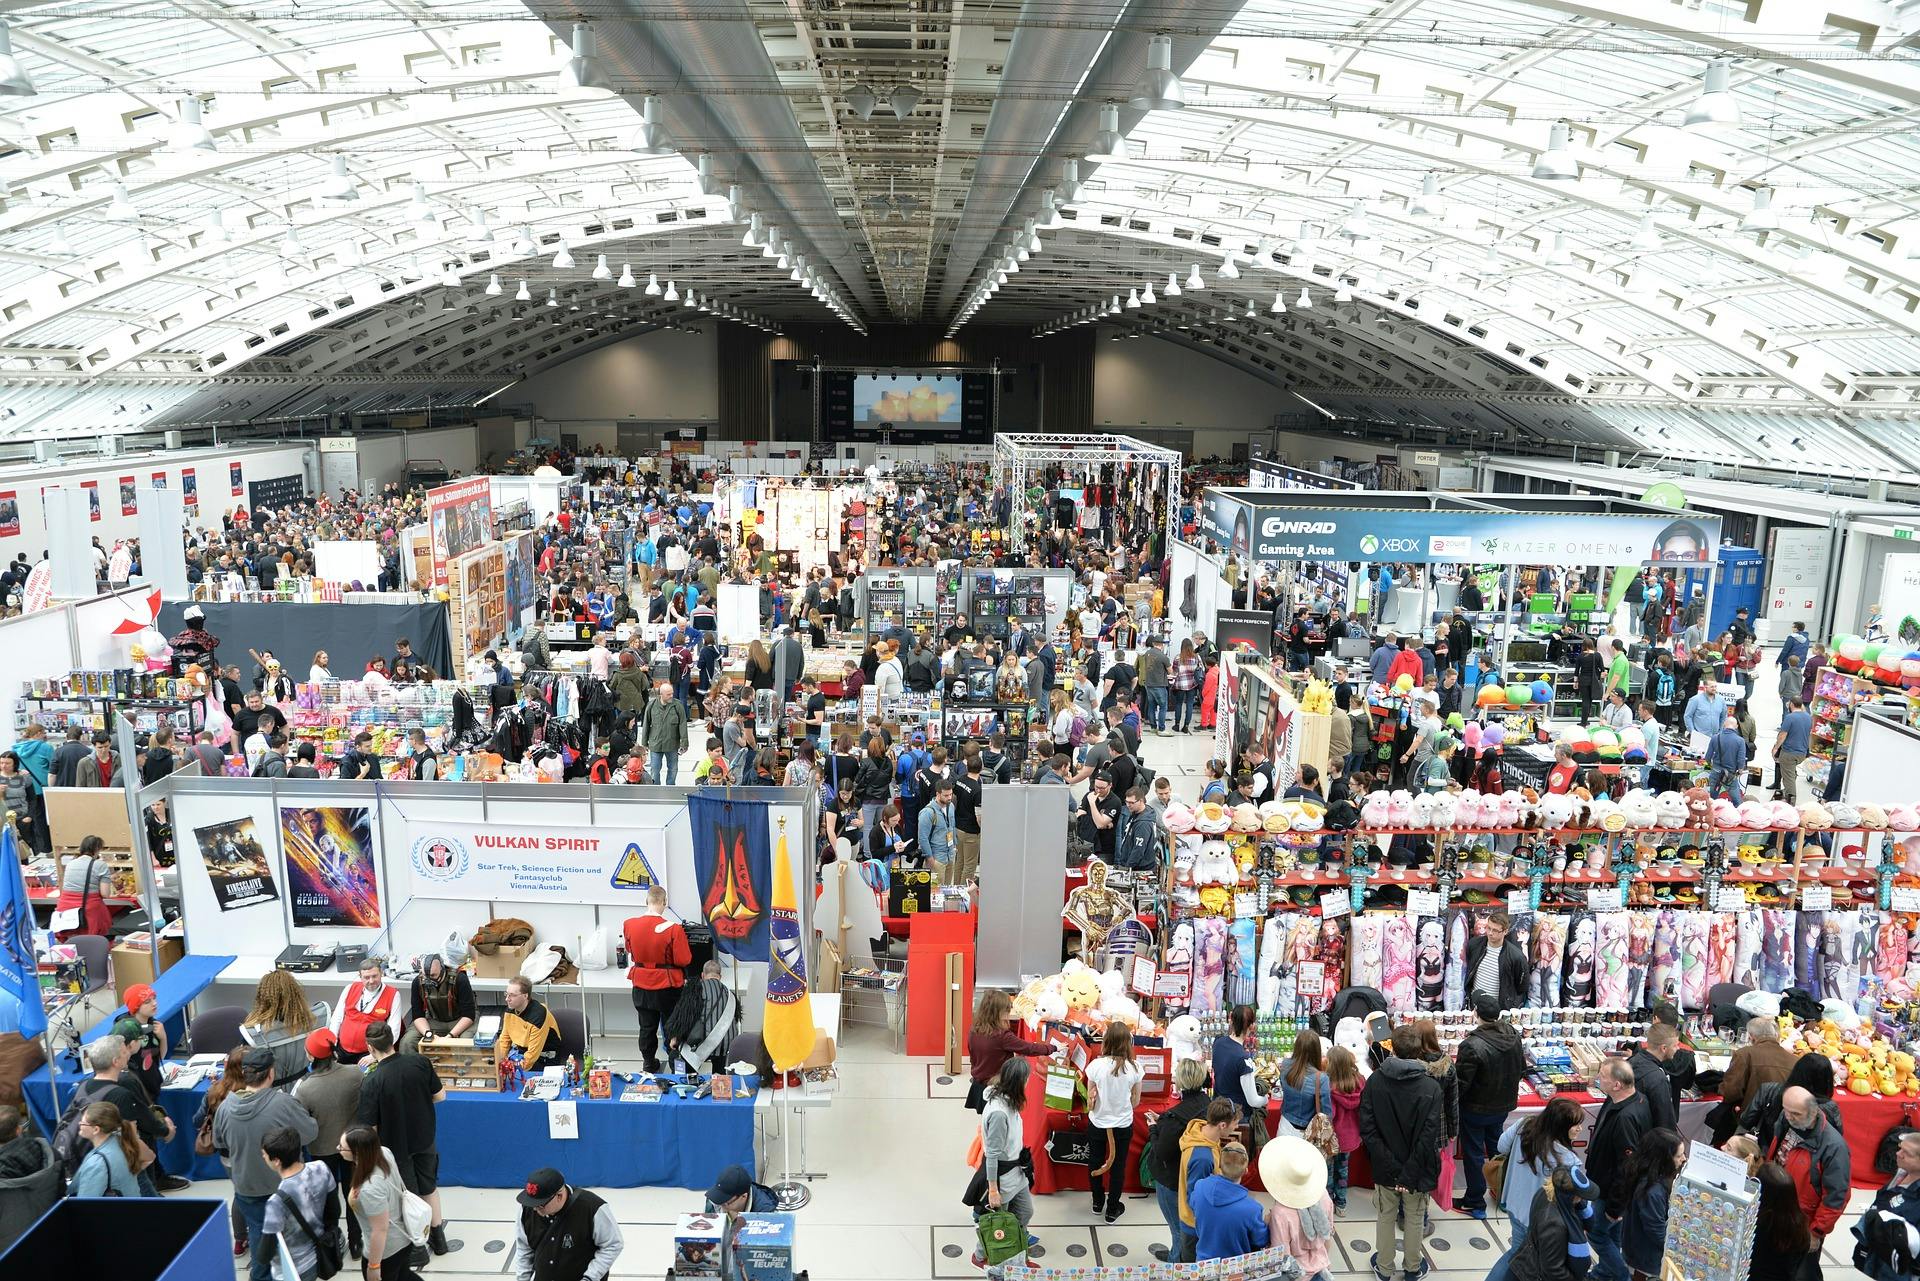 Comic convention with many stands and attendees.